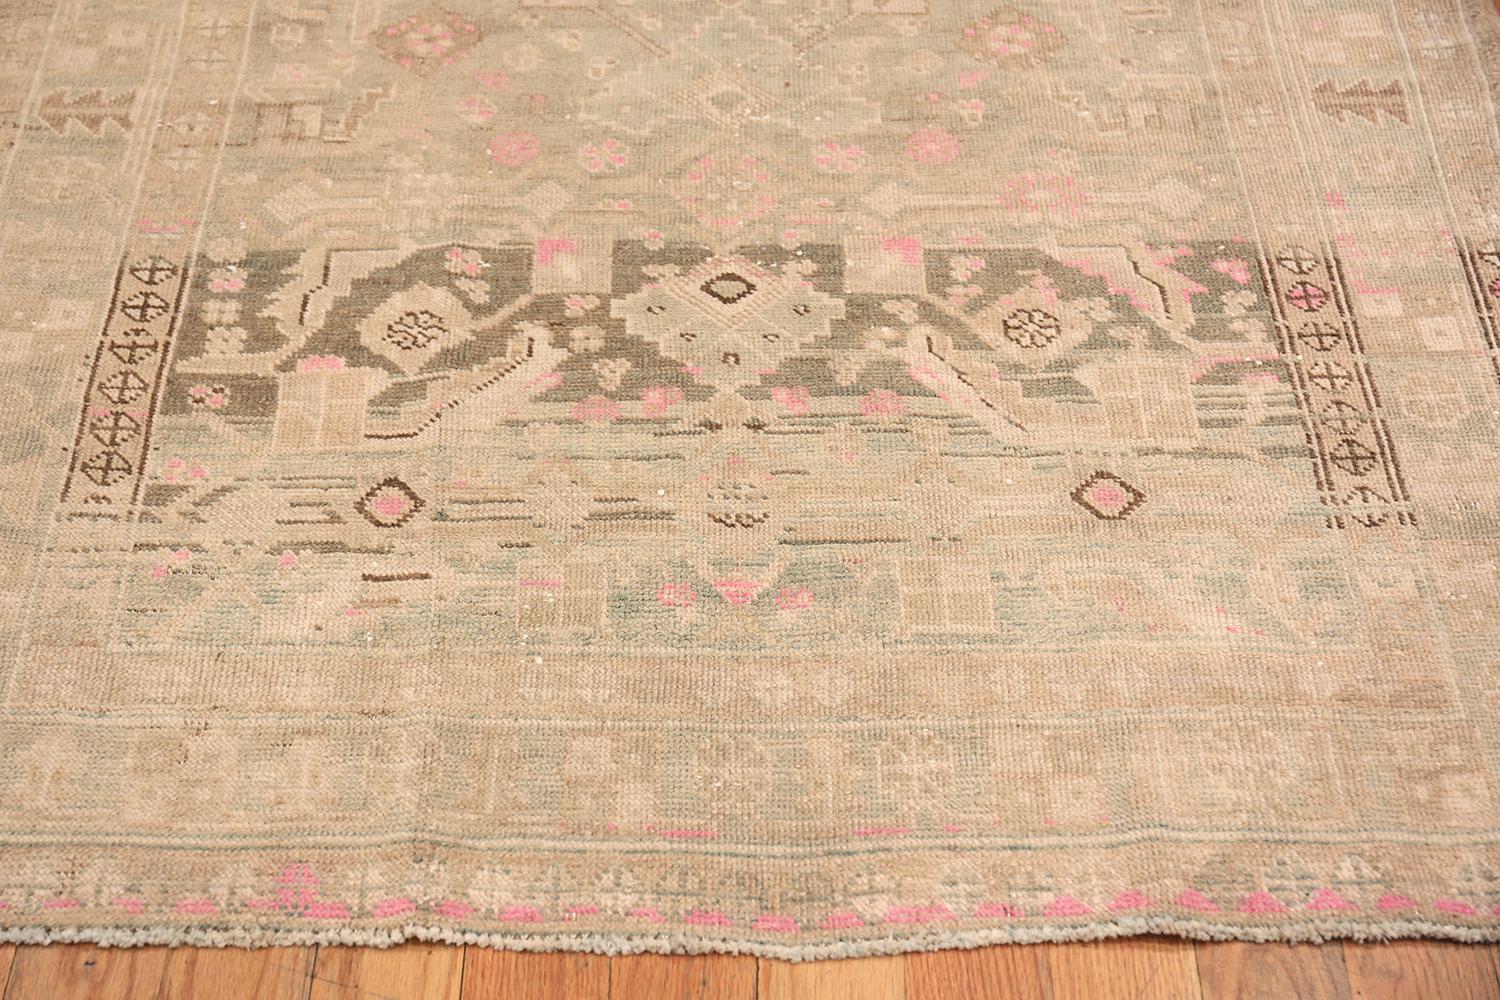 Decorative Tribal antique Persian Malayer runner rug, rug type / country of origin: Antique Persian rugs, date circa 1920 - Size: 4 ft 1 in x 9 ft 8 in (1.24 m x 2.95 m). 

This gorgeous Malayer rug has a shabby chic appeal that features earthy